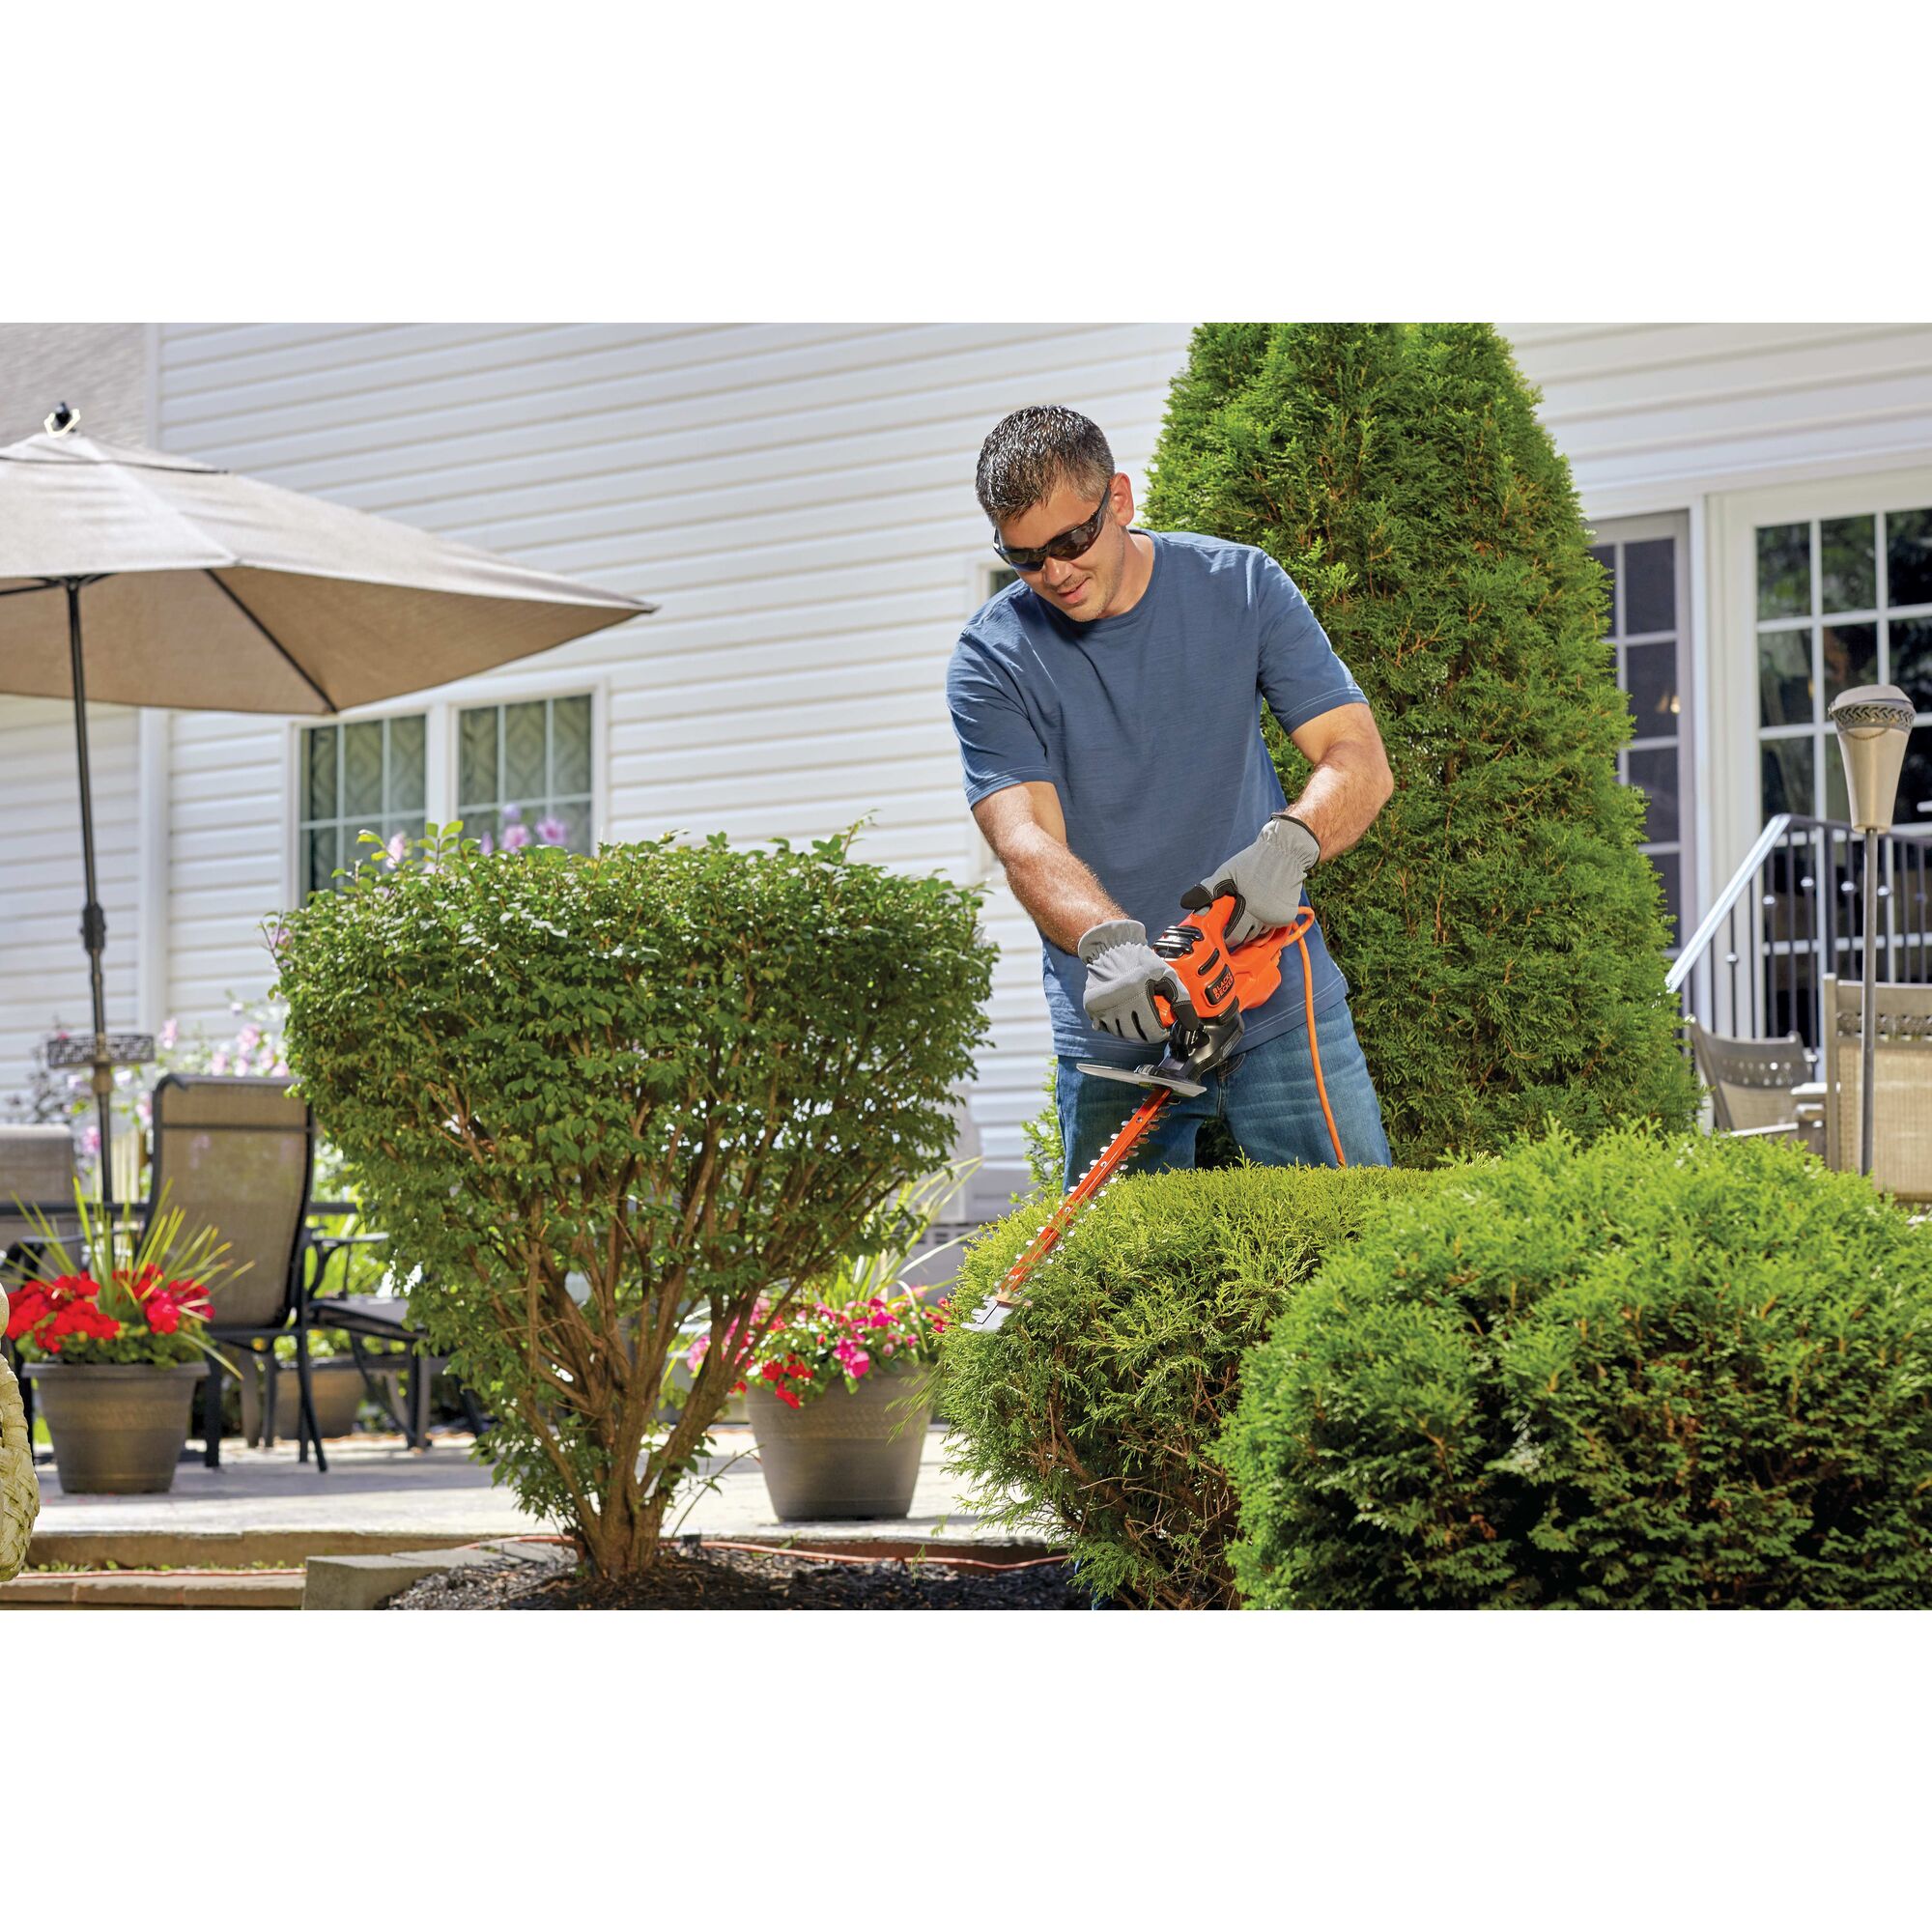 16 inch saw blade electric hedge trimmer being used by a person.